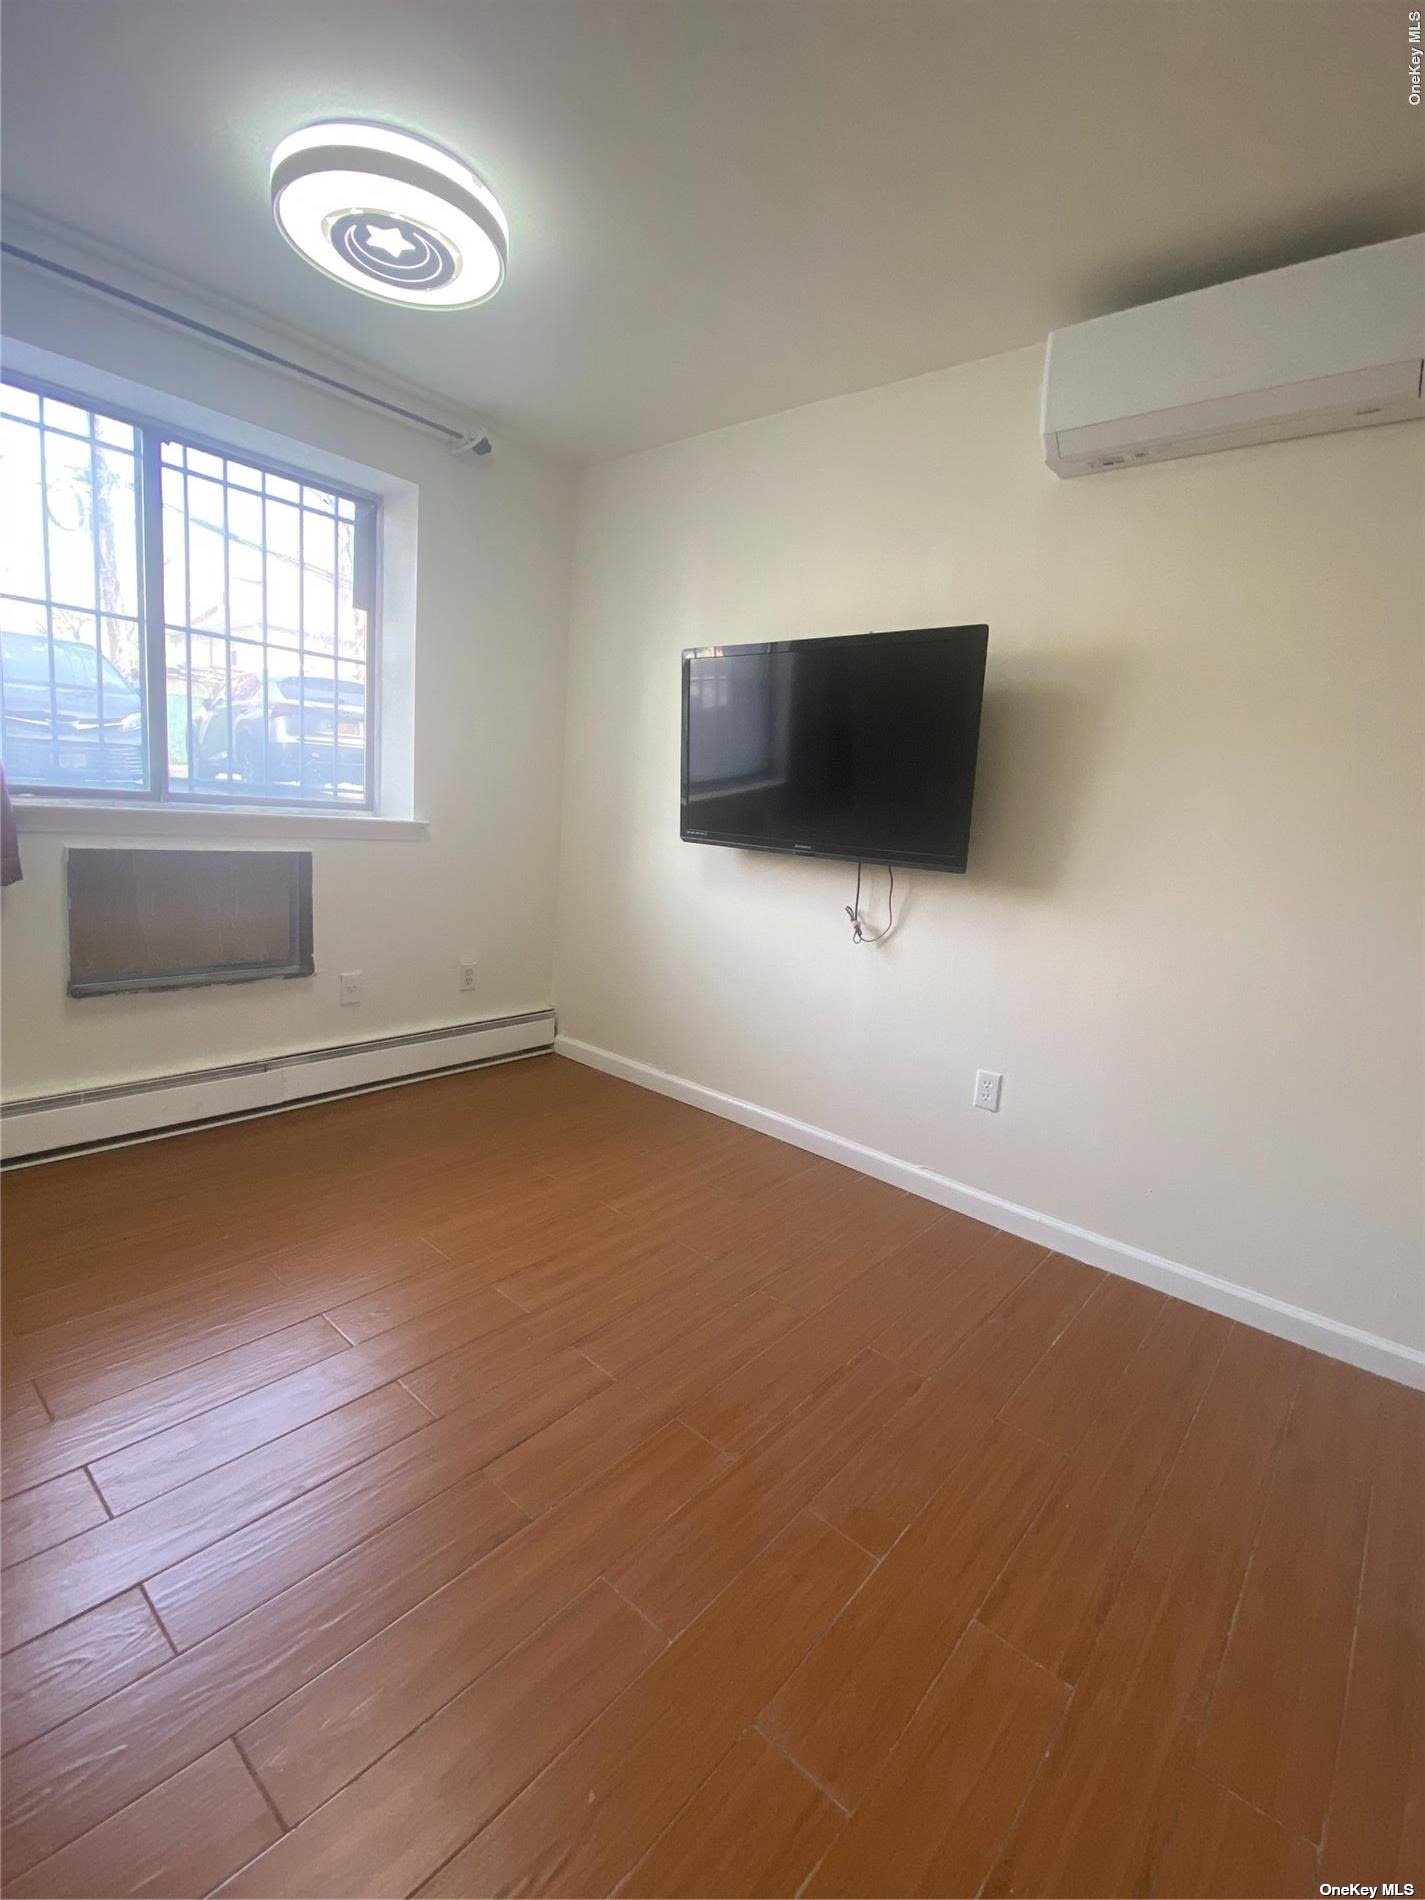 an empty room with windows and flat screen tv